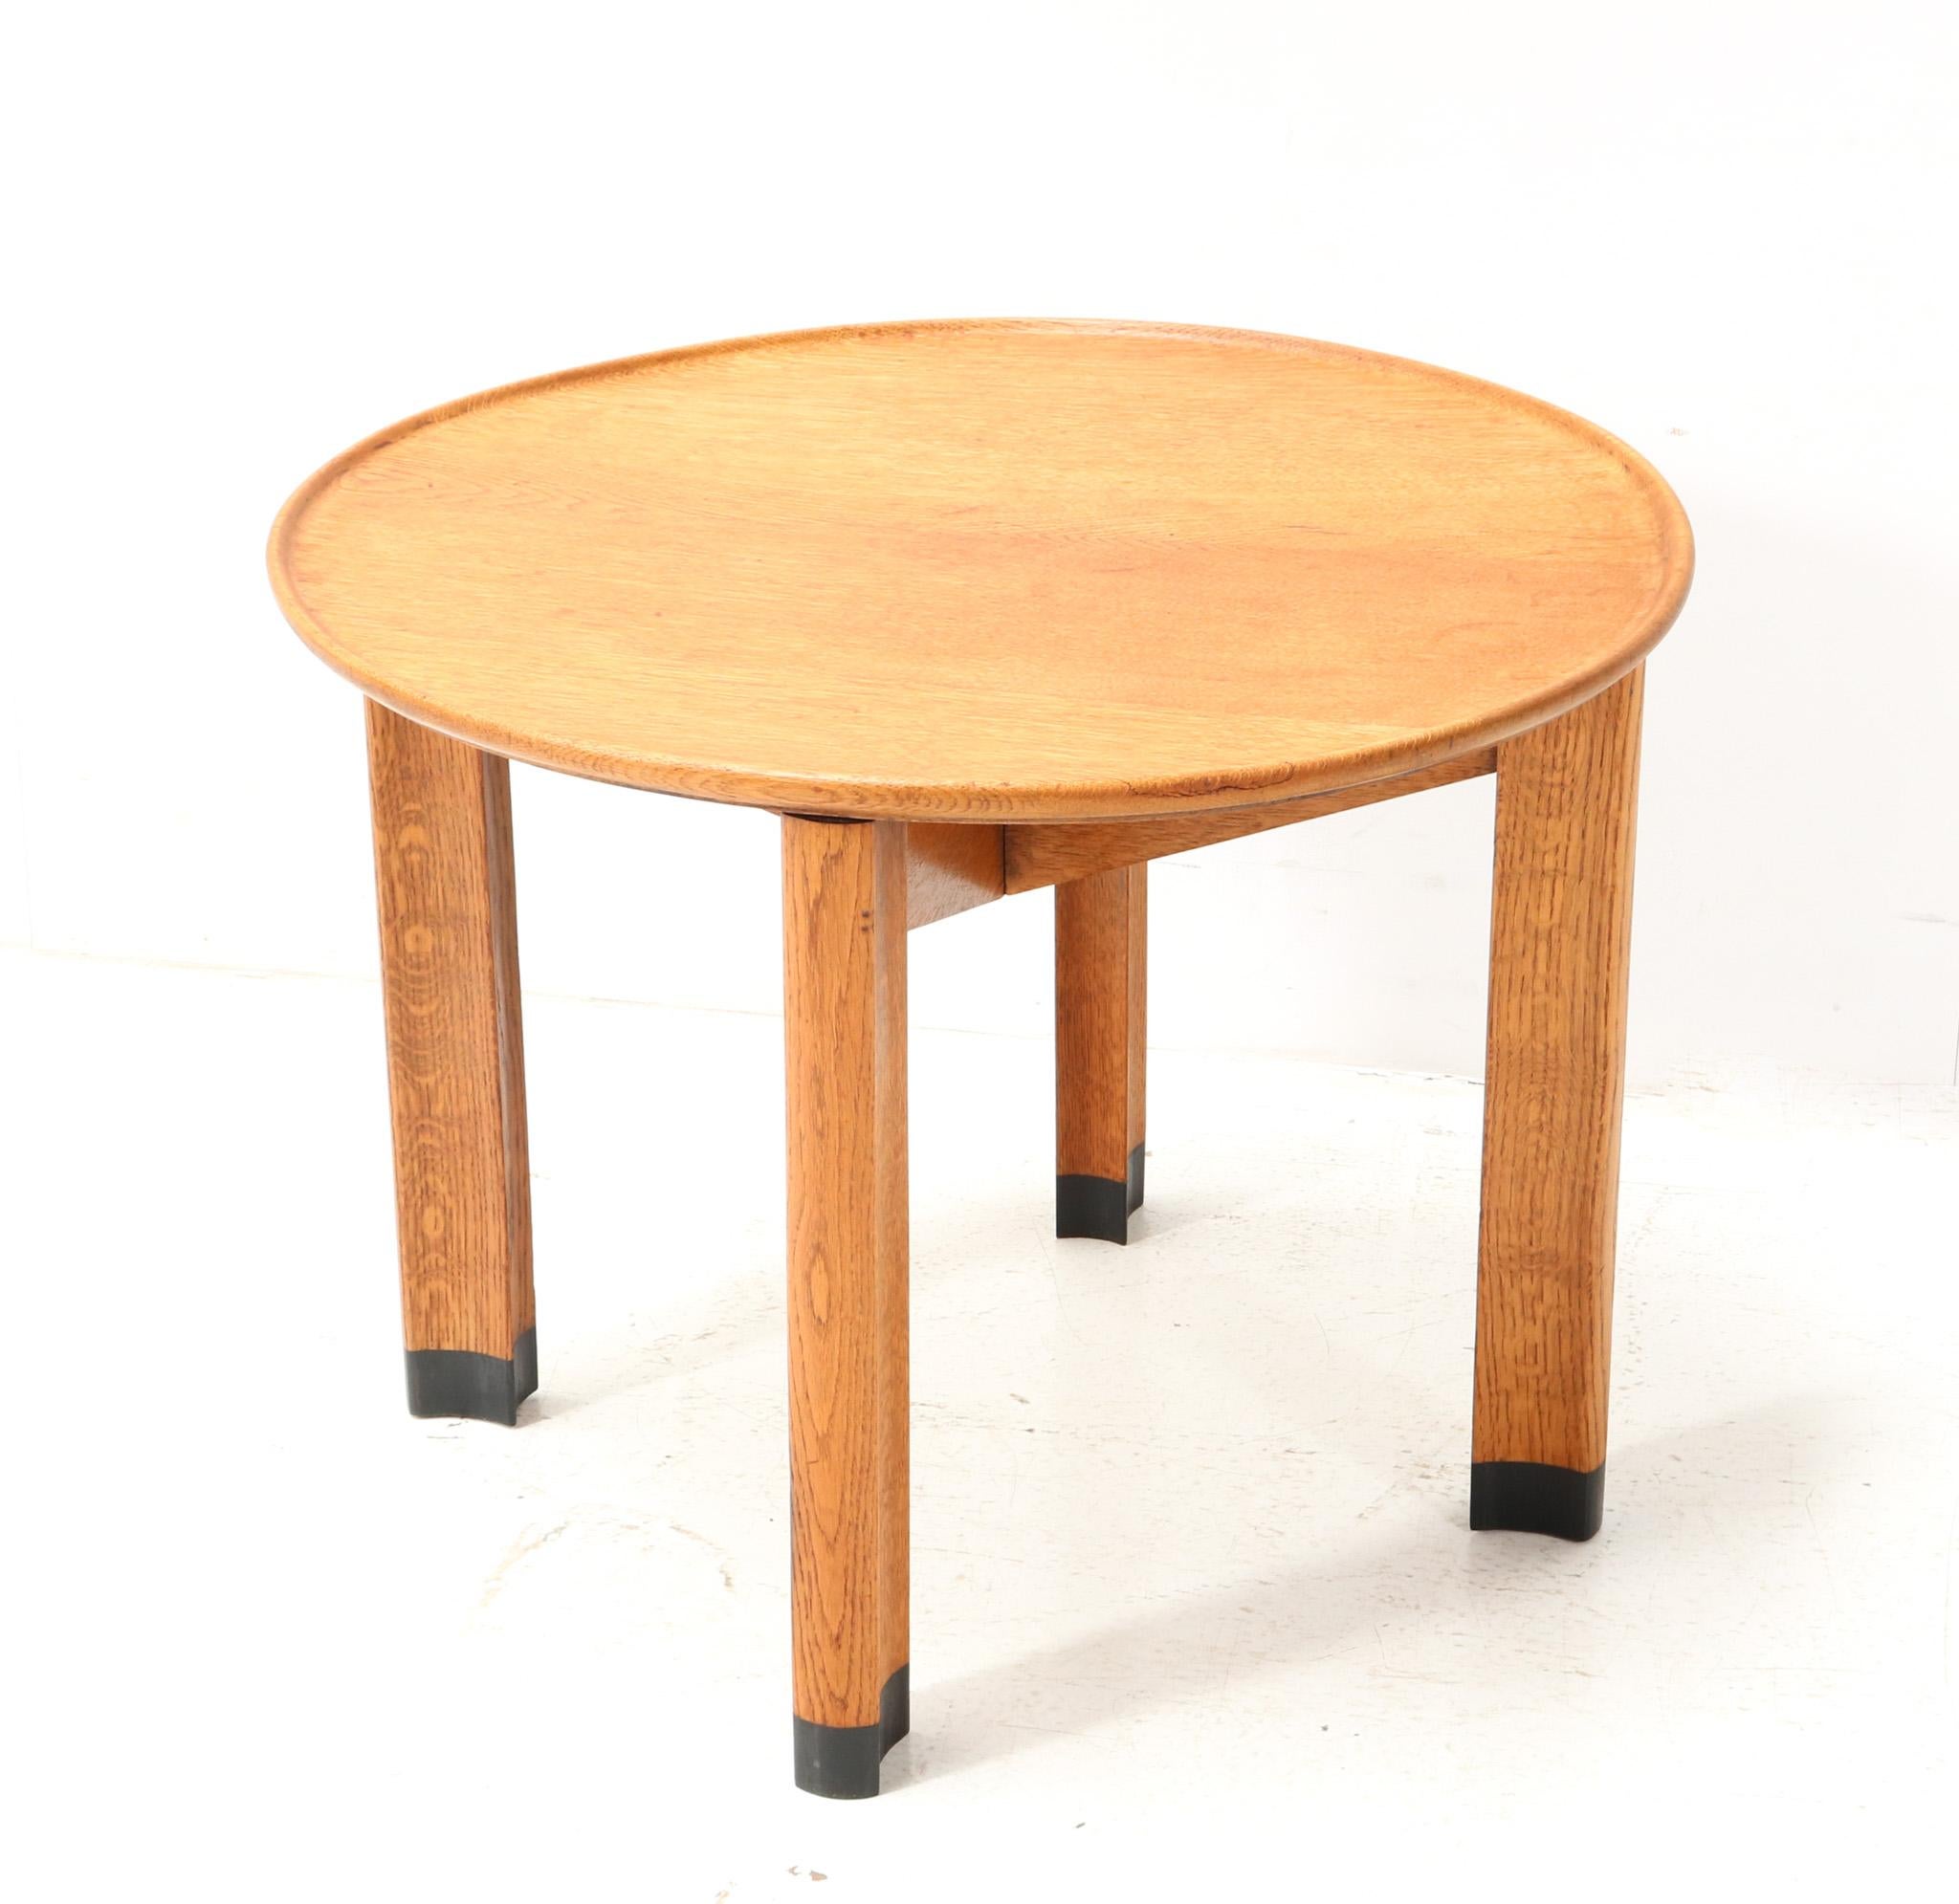 Magnificent and rare Art Deco Amsterdamse School side table.
Design by Piet Kramer for N.V. v/h A.M. Randoe en Zonen Haarlem.
Solid oak frame with at the end of the four legs black lacquered socks.
Original solid oak top.
The sleek and elegant